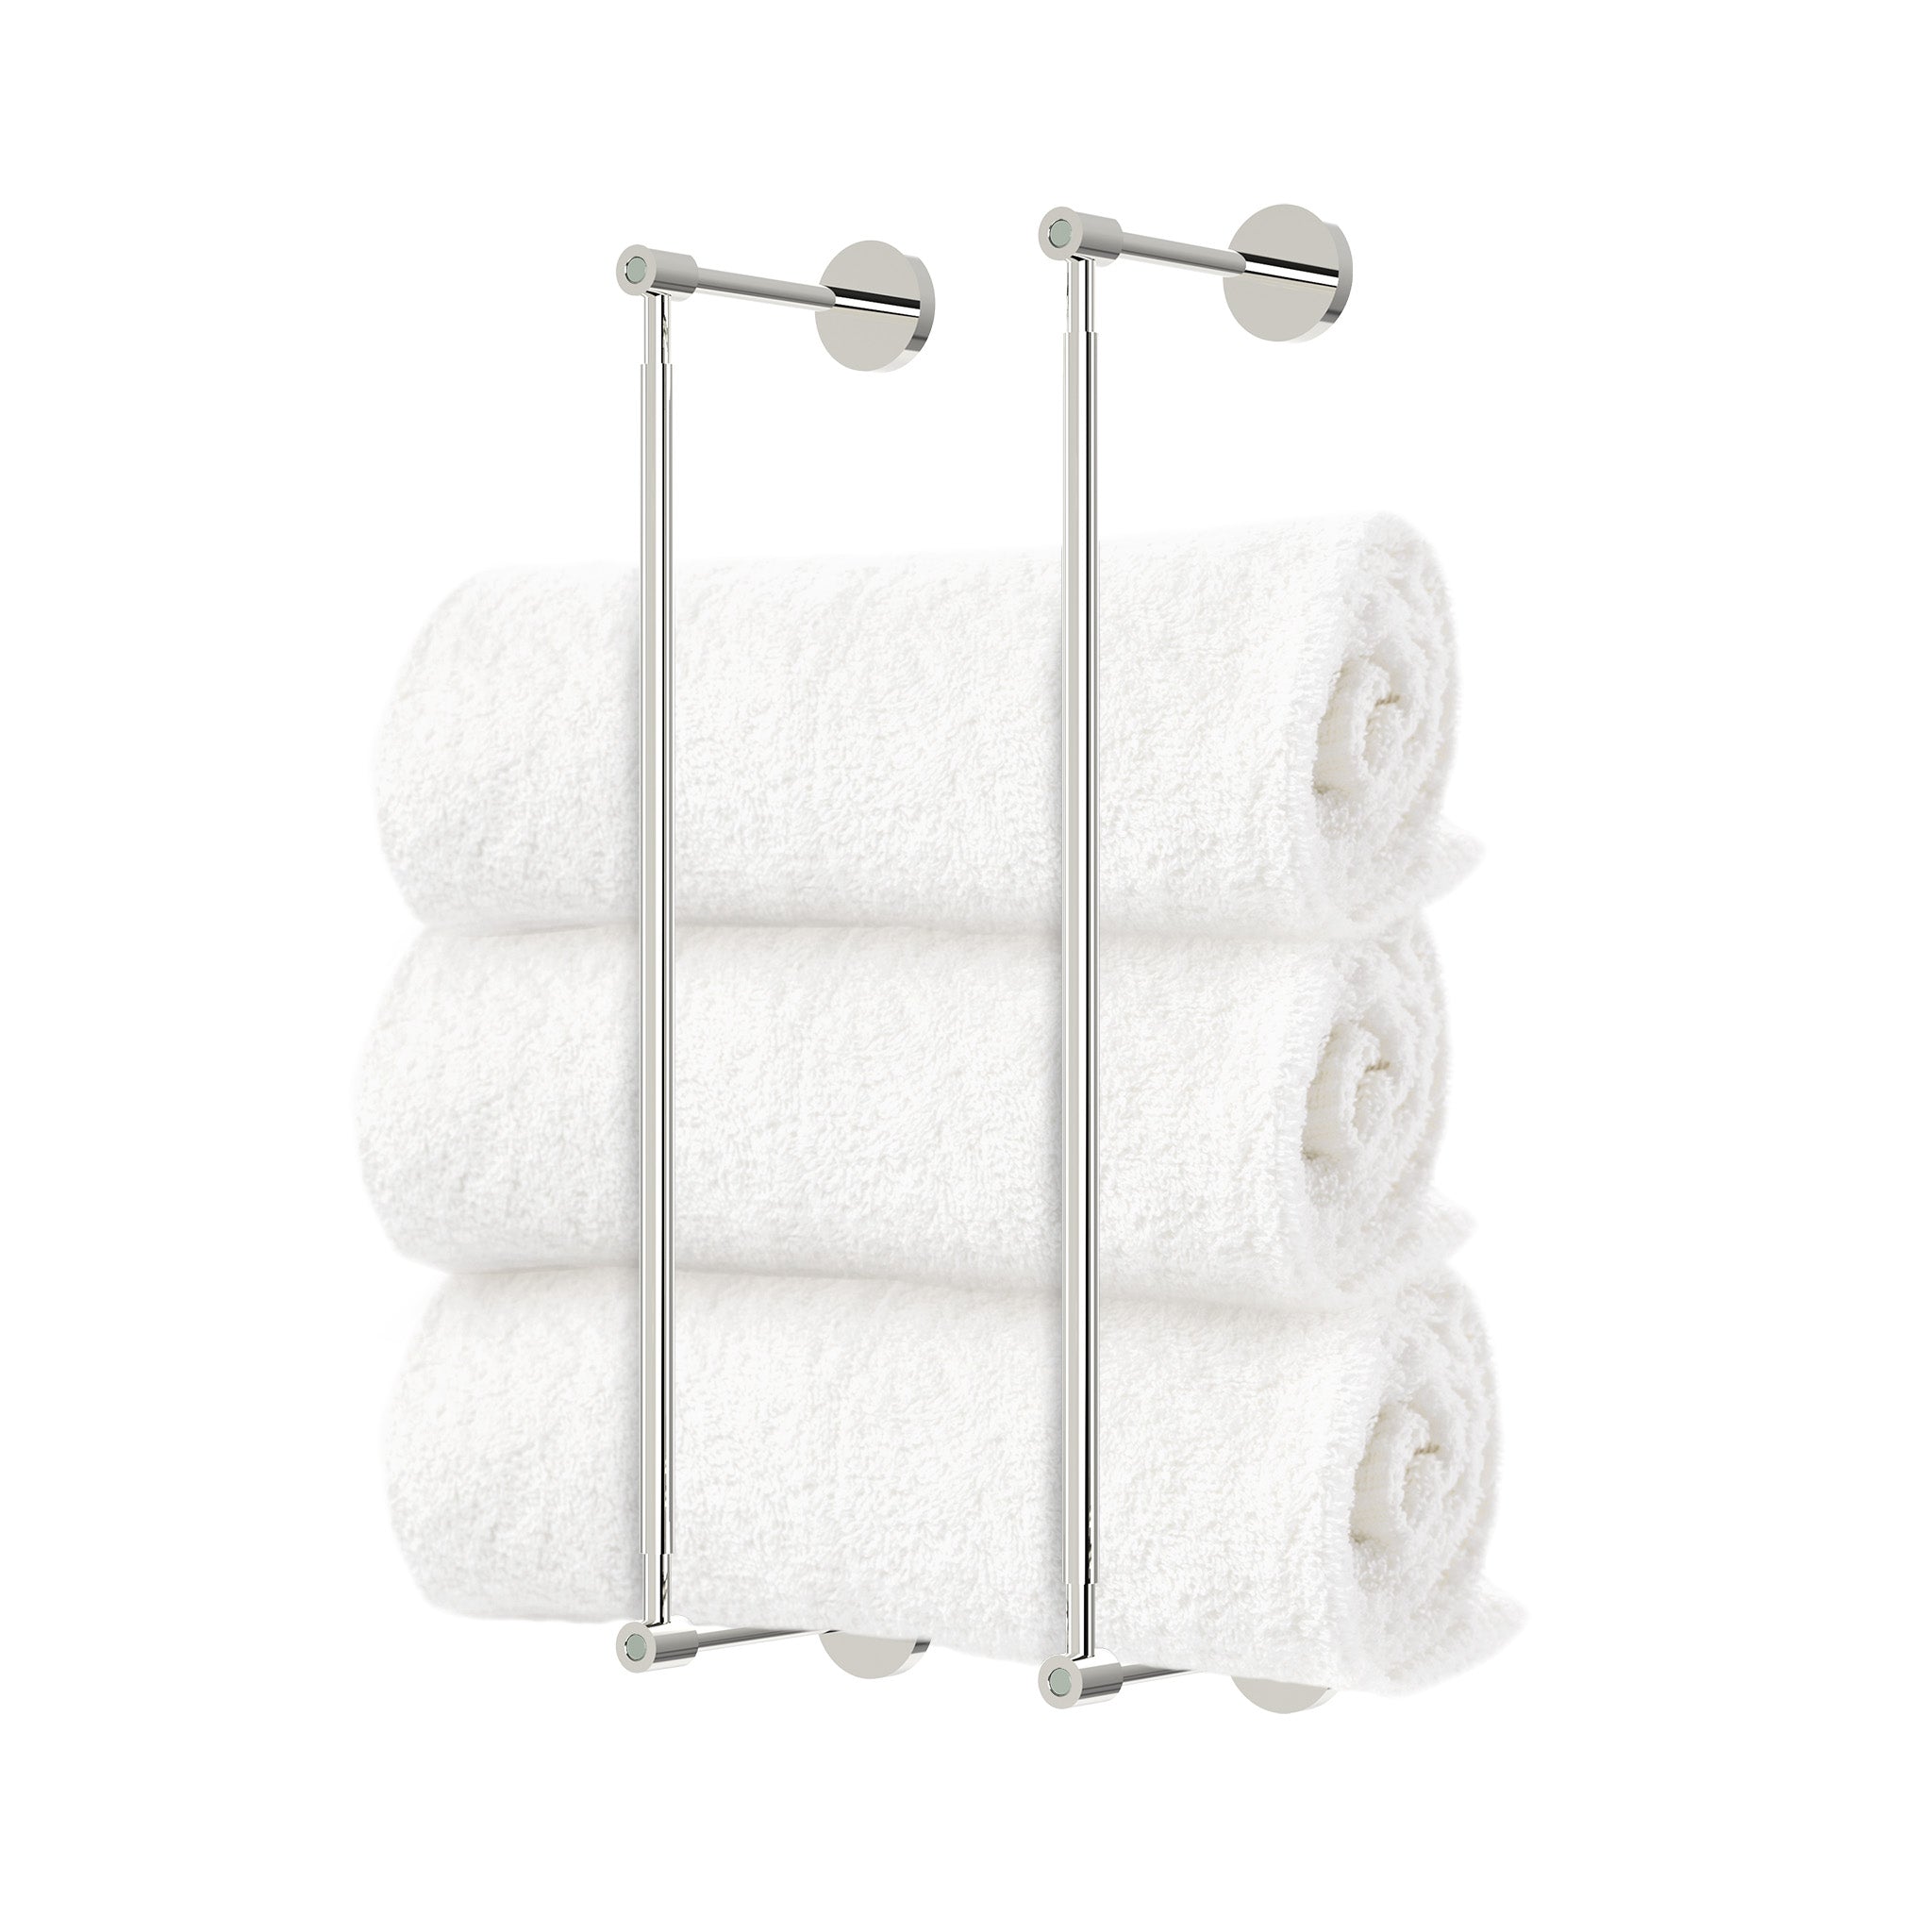 Nickel and spa head towel rack 18 inch dutton brown hardware